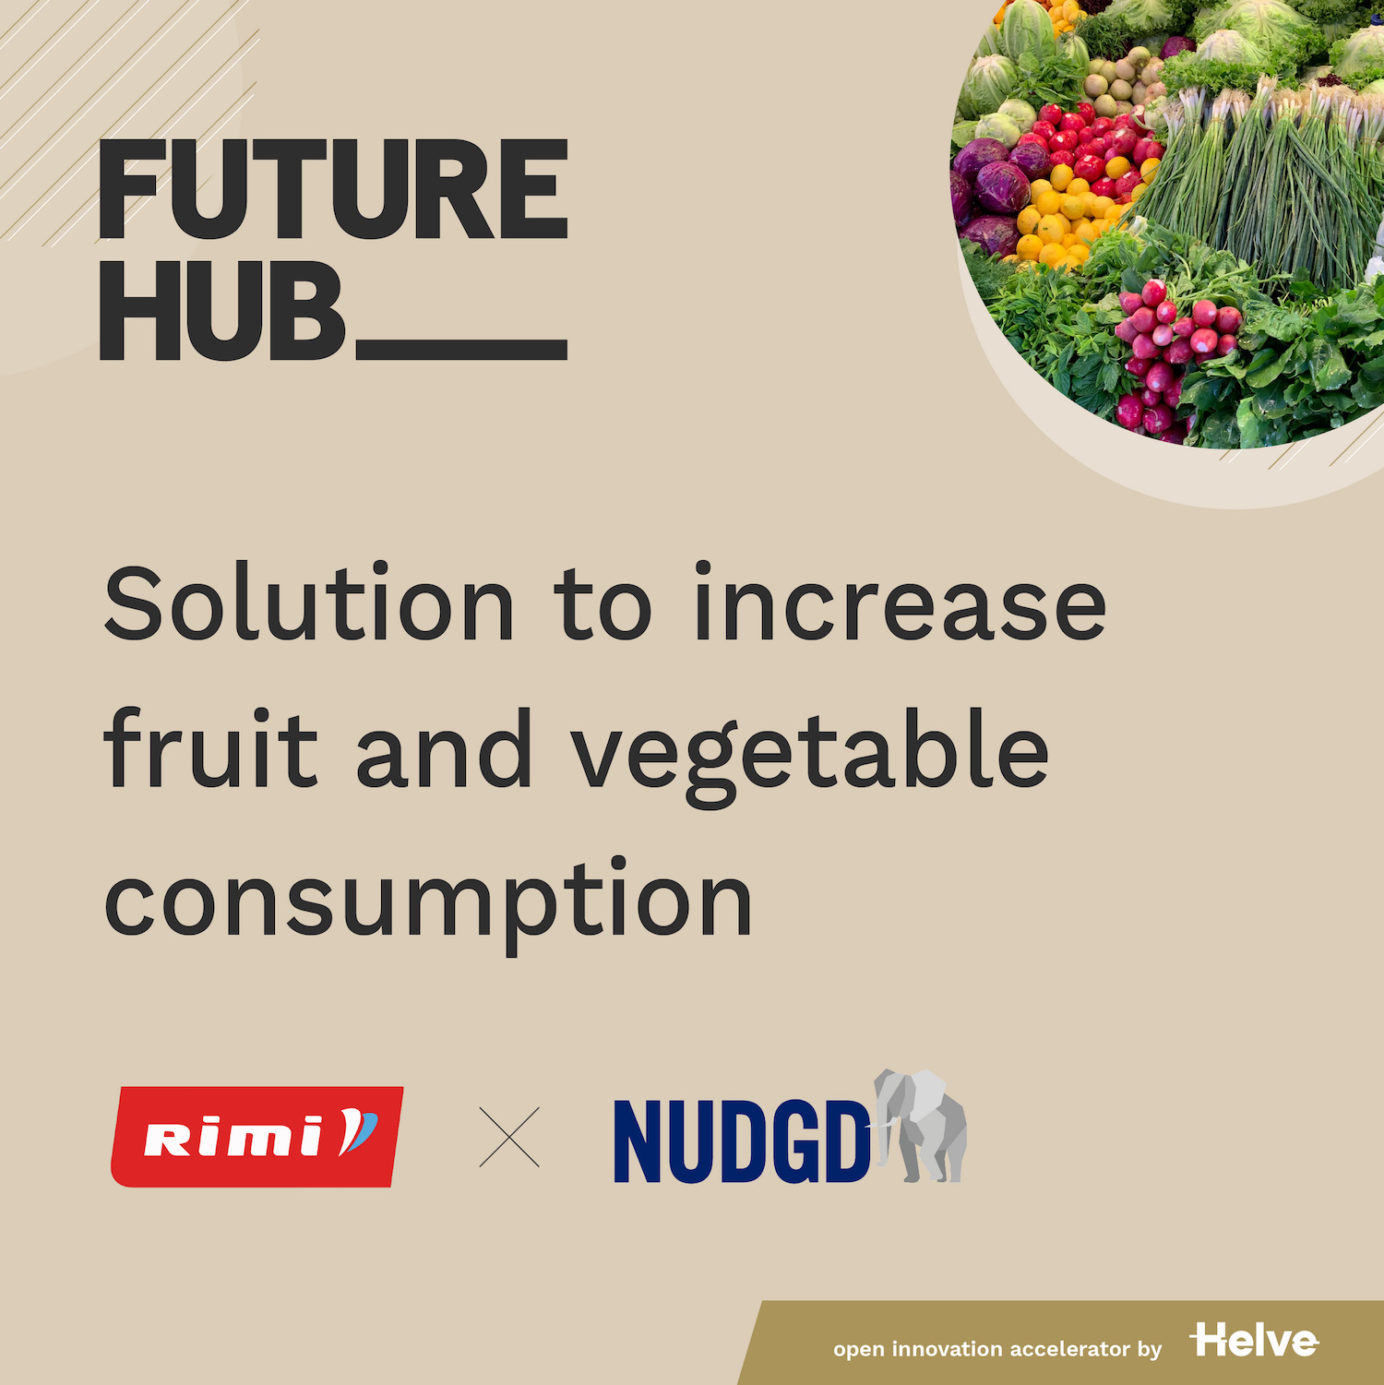 Future Hub: Solution to increase fruit and vegetable consumption